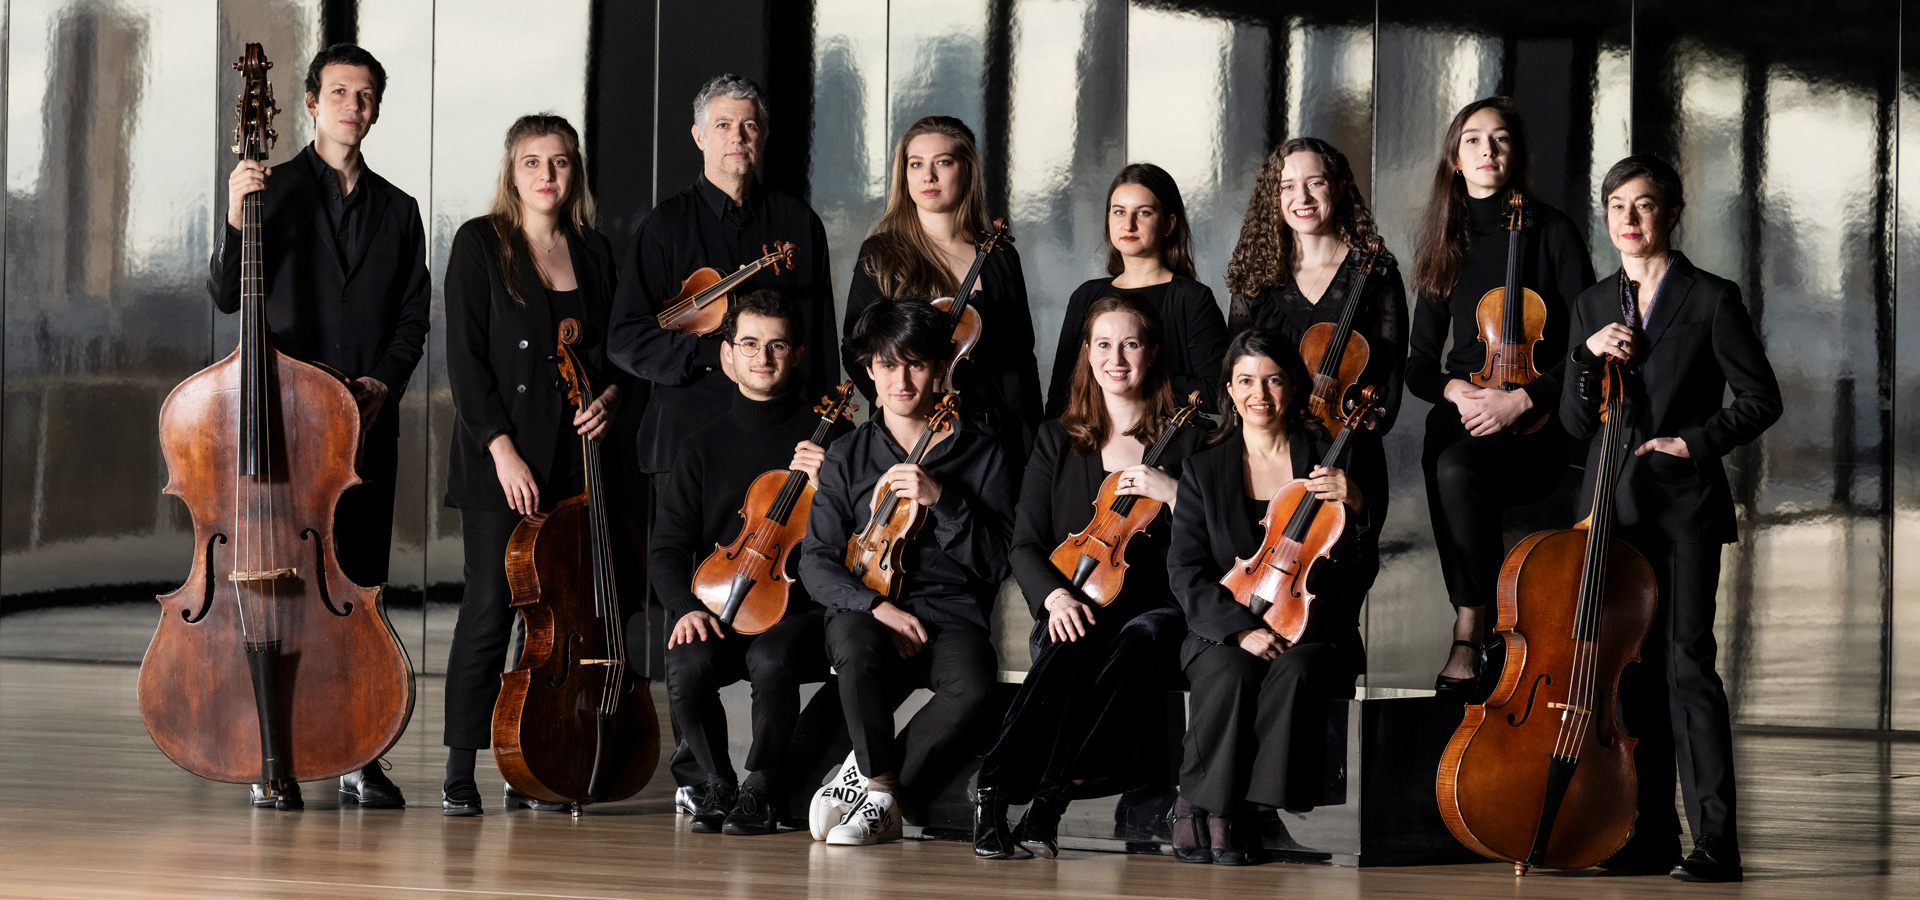 The twelve musicians of the Les Arts Florissants group wear black formal dress and pose with their instruments against a metallic backdrop.